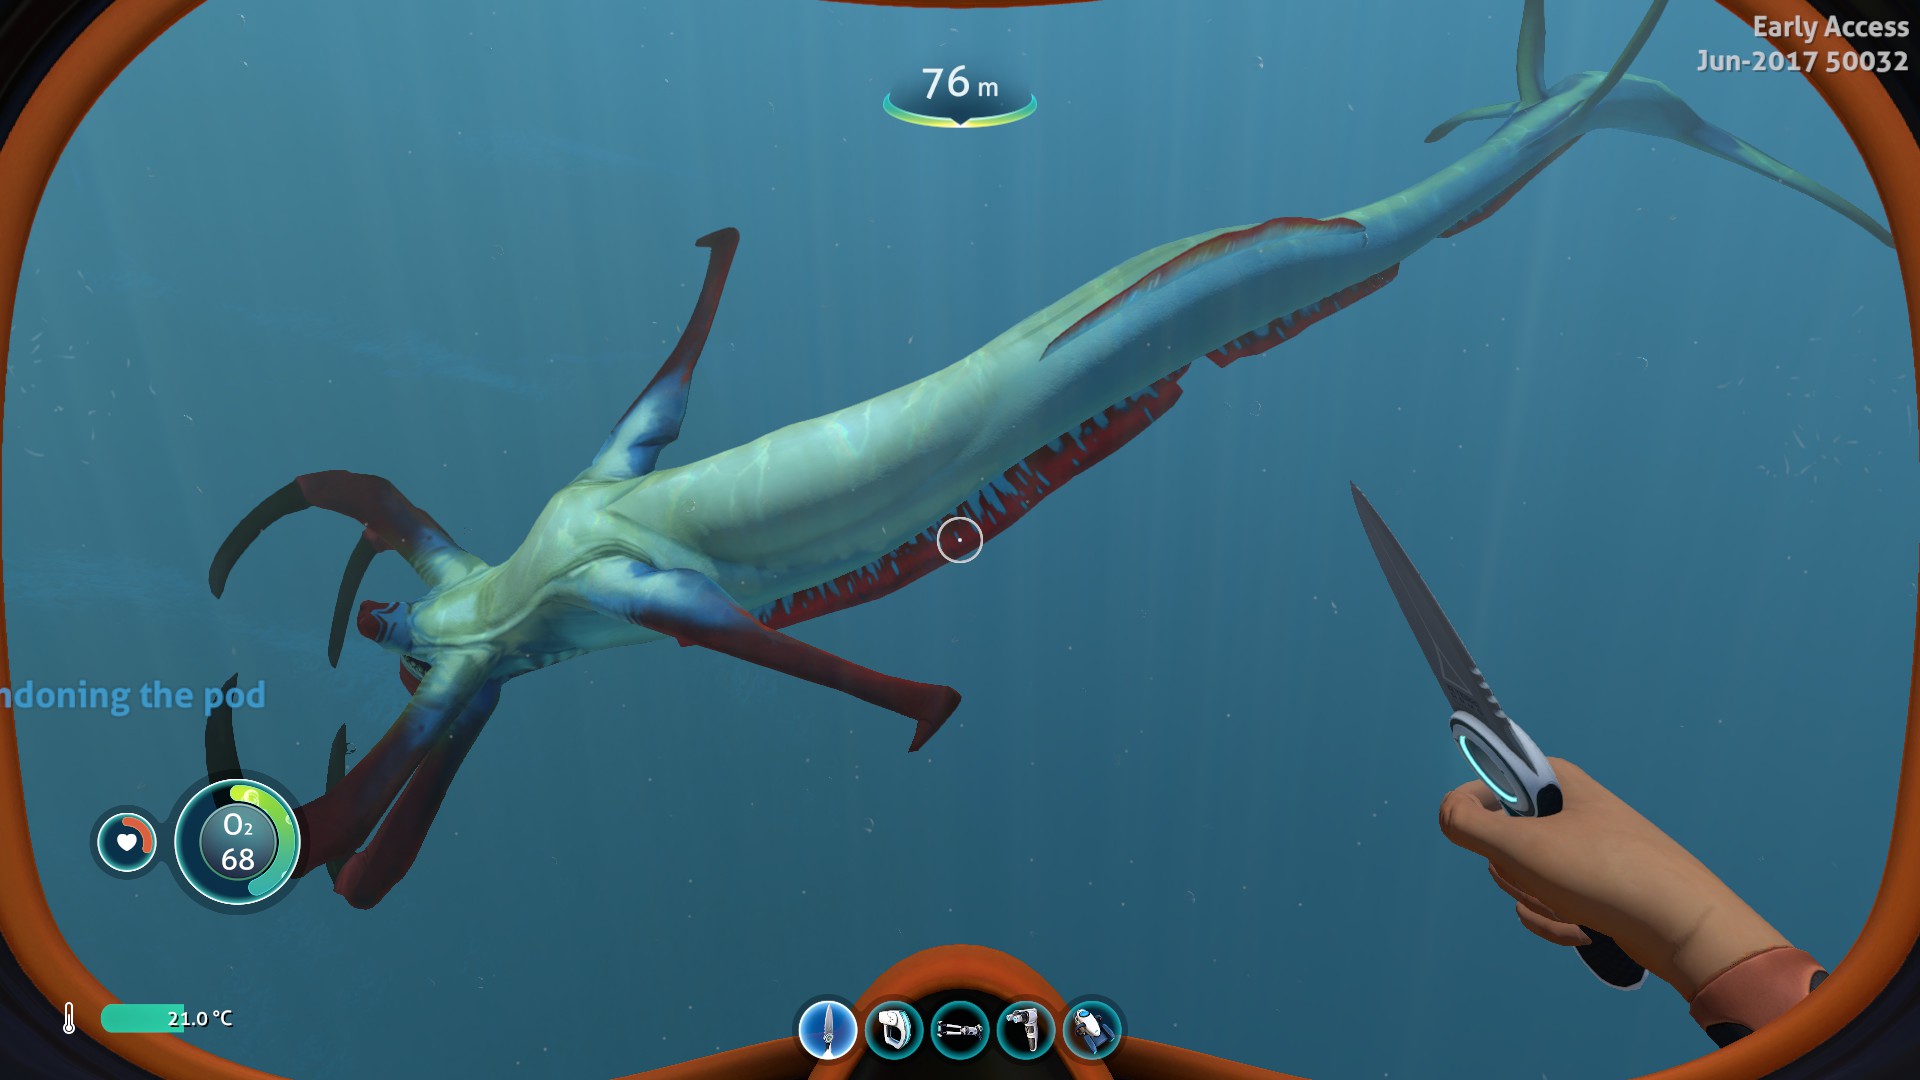 A deceased alien creature from the video game Subnautica